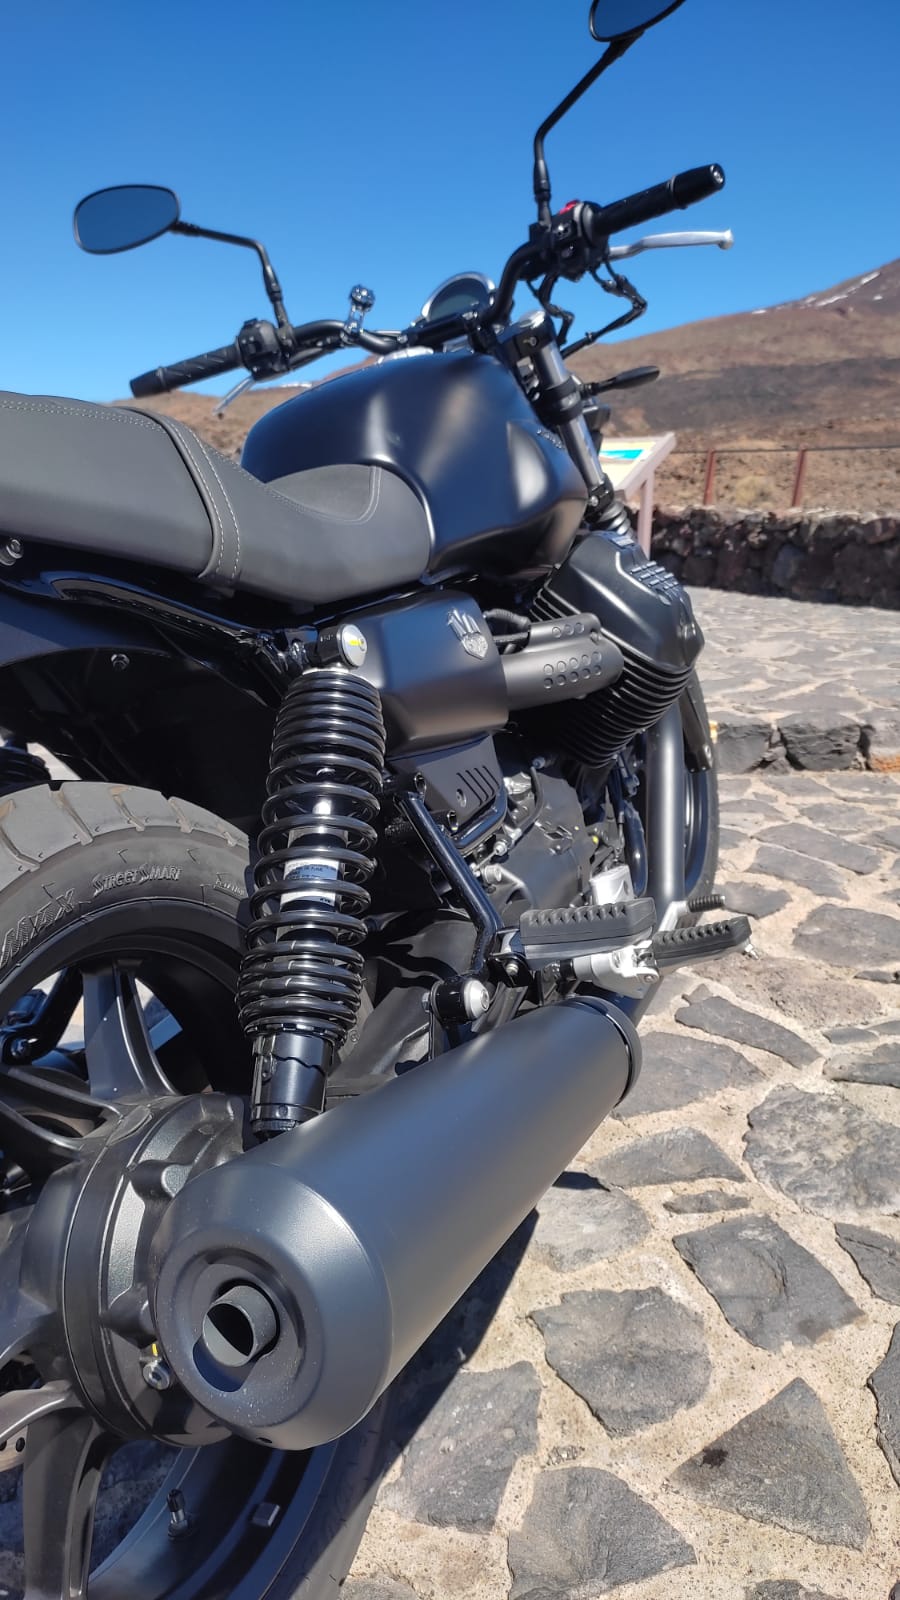 A black motorcycle is parked on a cobblestone road.